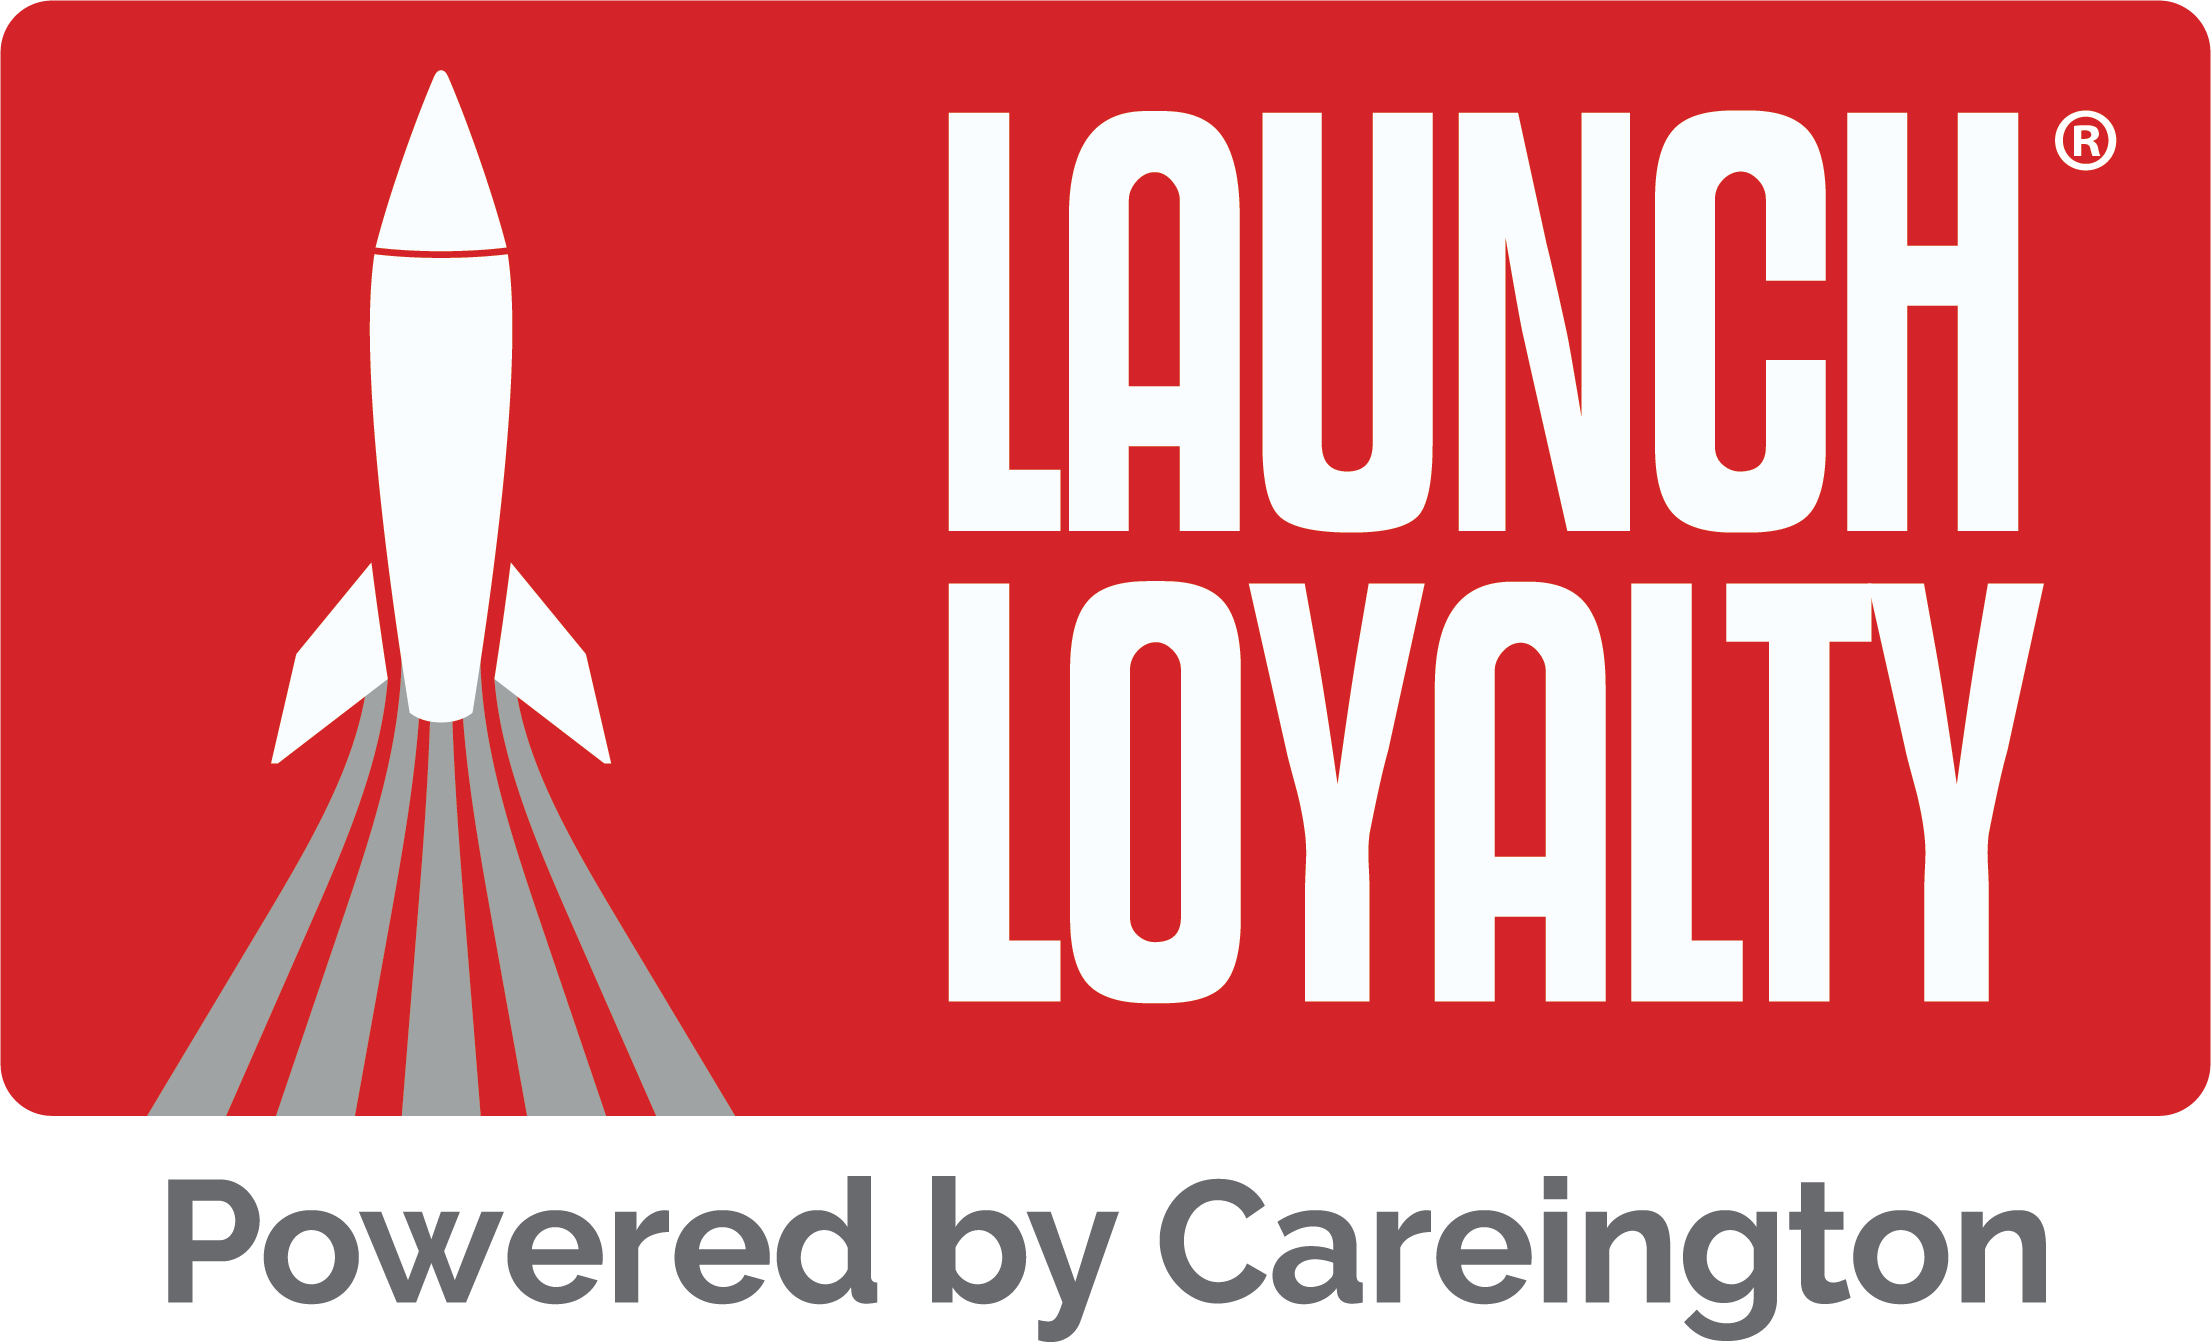 Official Launch Loyalty Powered by Careington Logo